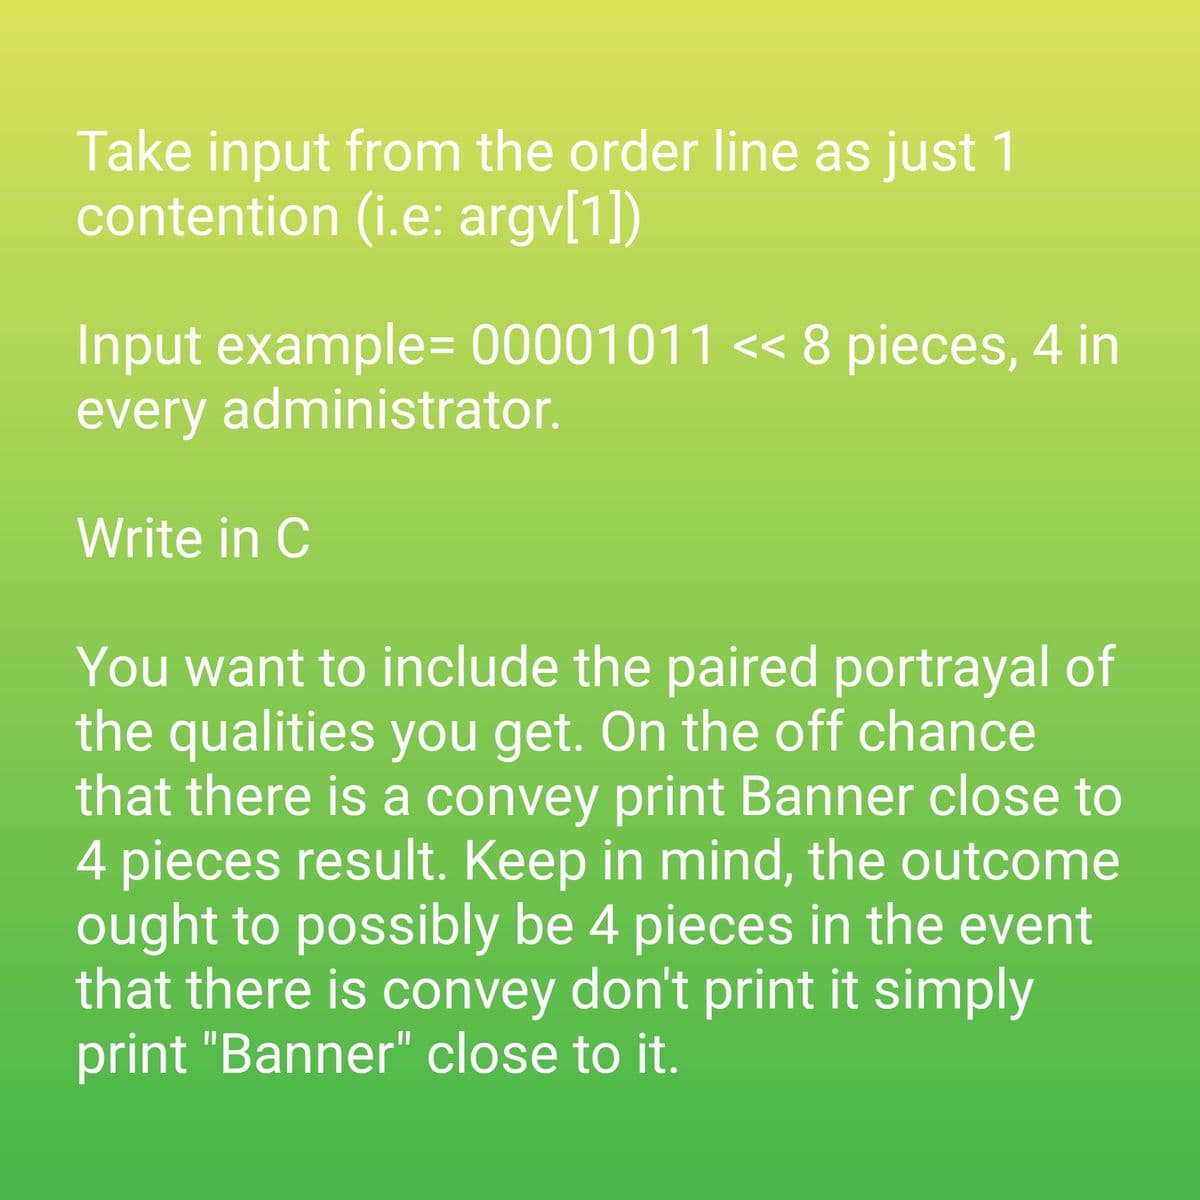 Take input from the order line as just 1
contention (i.e: argv[1])
Input example=00001011 << 8 pieces, 4 in
every administrator.
Write in C
You want to include the paired portrayal of
the qualities you get. On the off chance
that there is a convey print Banner close to
4 pieces result. Keep in mind, the outcome
ought to possibly be 4 pieces in the event
that there is convey don't print it simply
print "Banner" close to it.